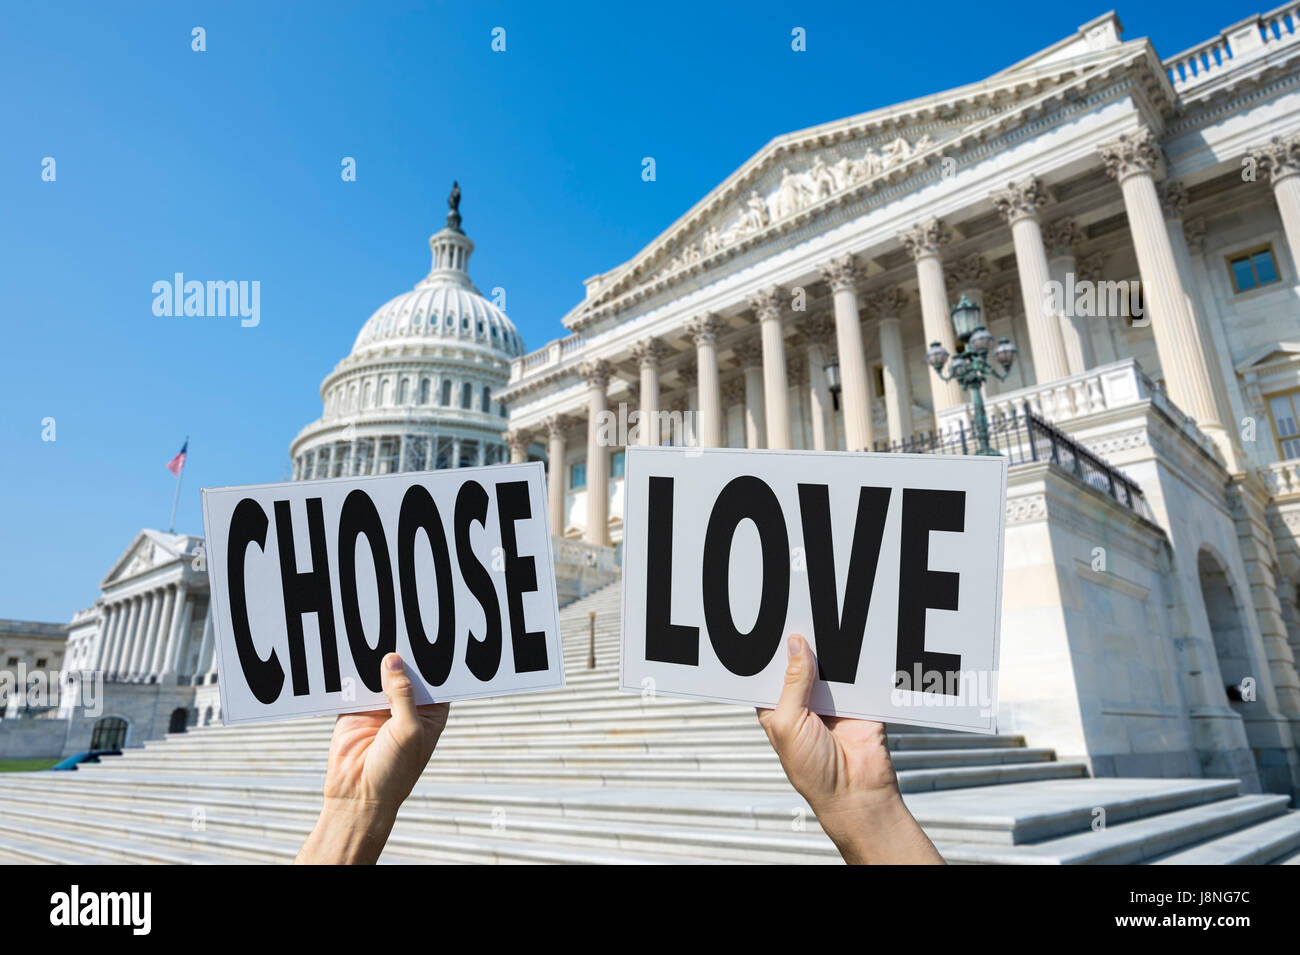 Hands of political protesters holding signs of the positive message CHOOSE LOVE in front of the Capitol Building in Washington DC, USA Stock Photo